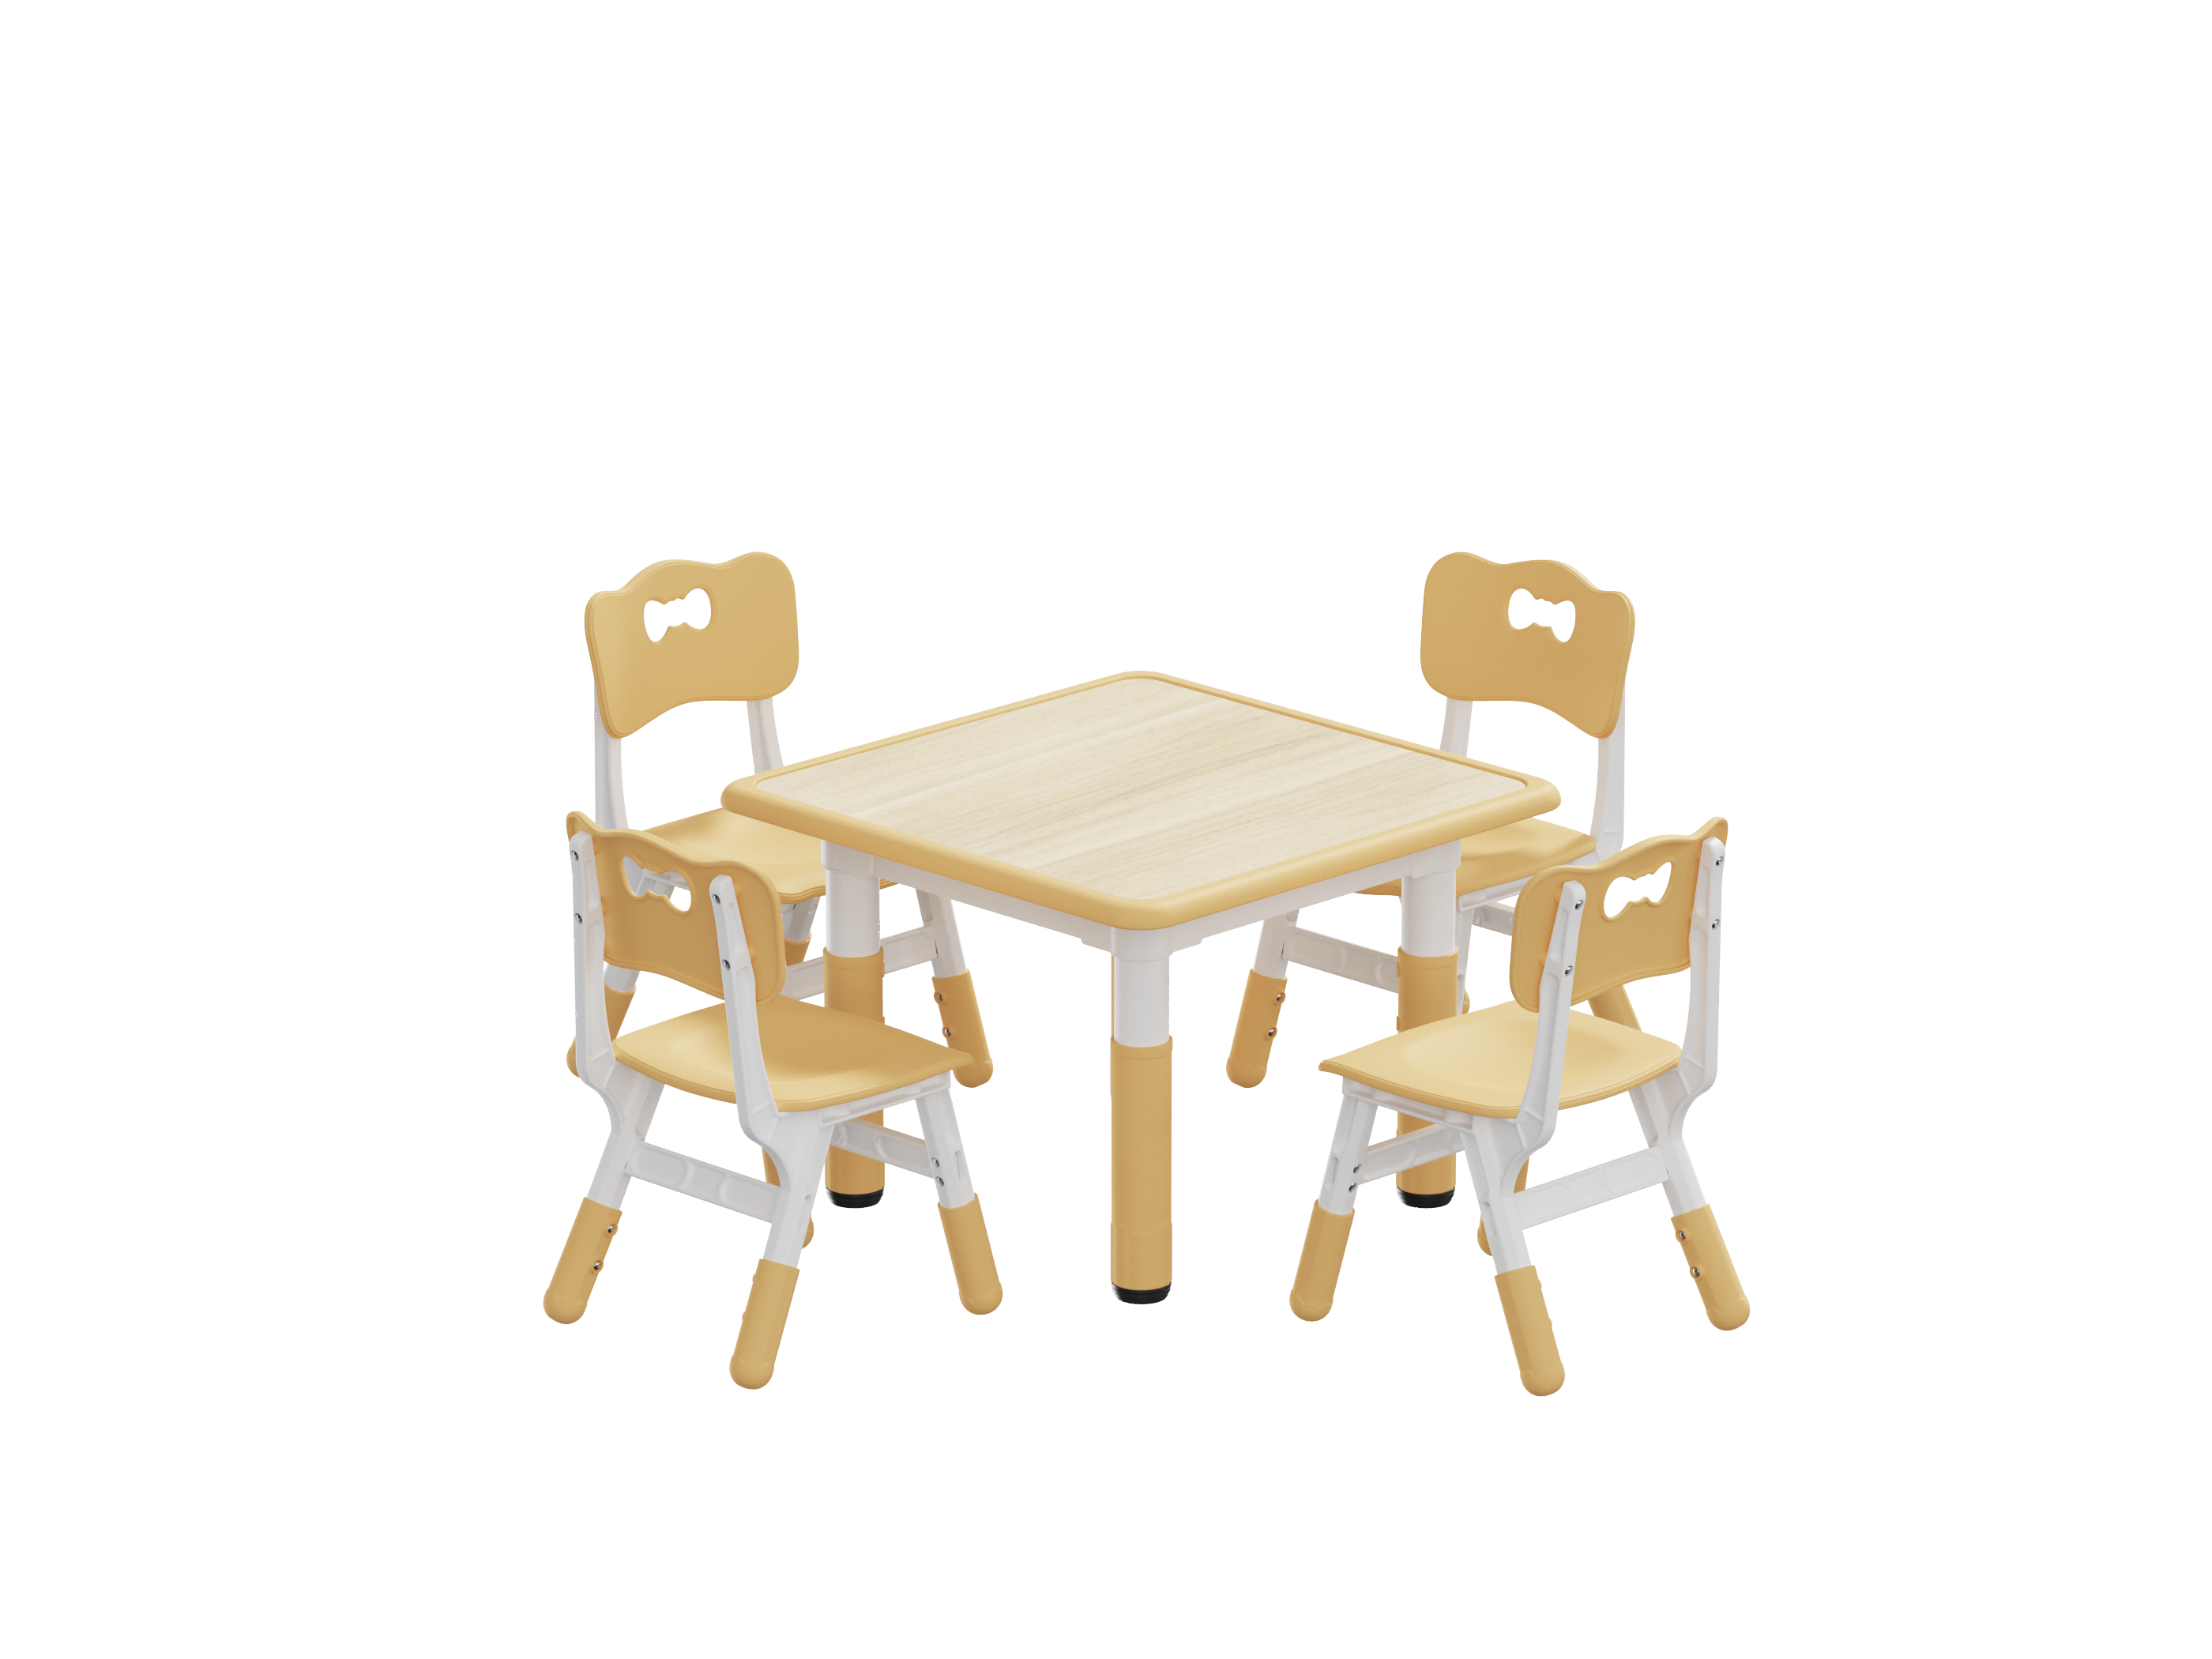 Brelley Kids Table and Chairs Set Beige, Height Adjustable, Suit for Ages 2-10, Wooden Finish, Size: 47.20 x 23.60 x 23.60